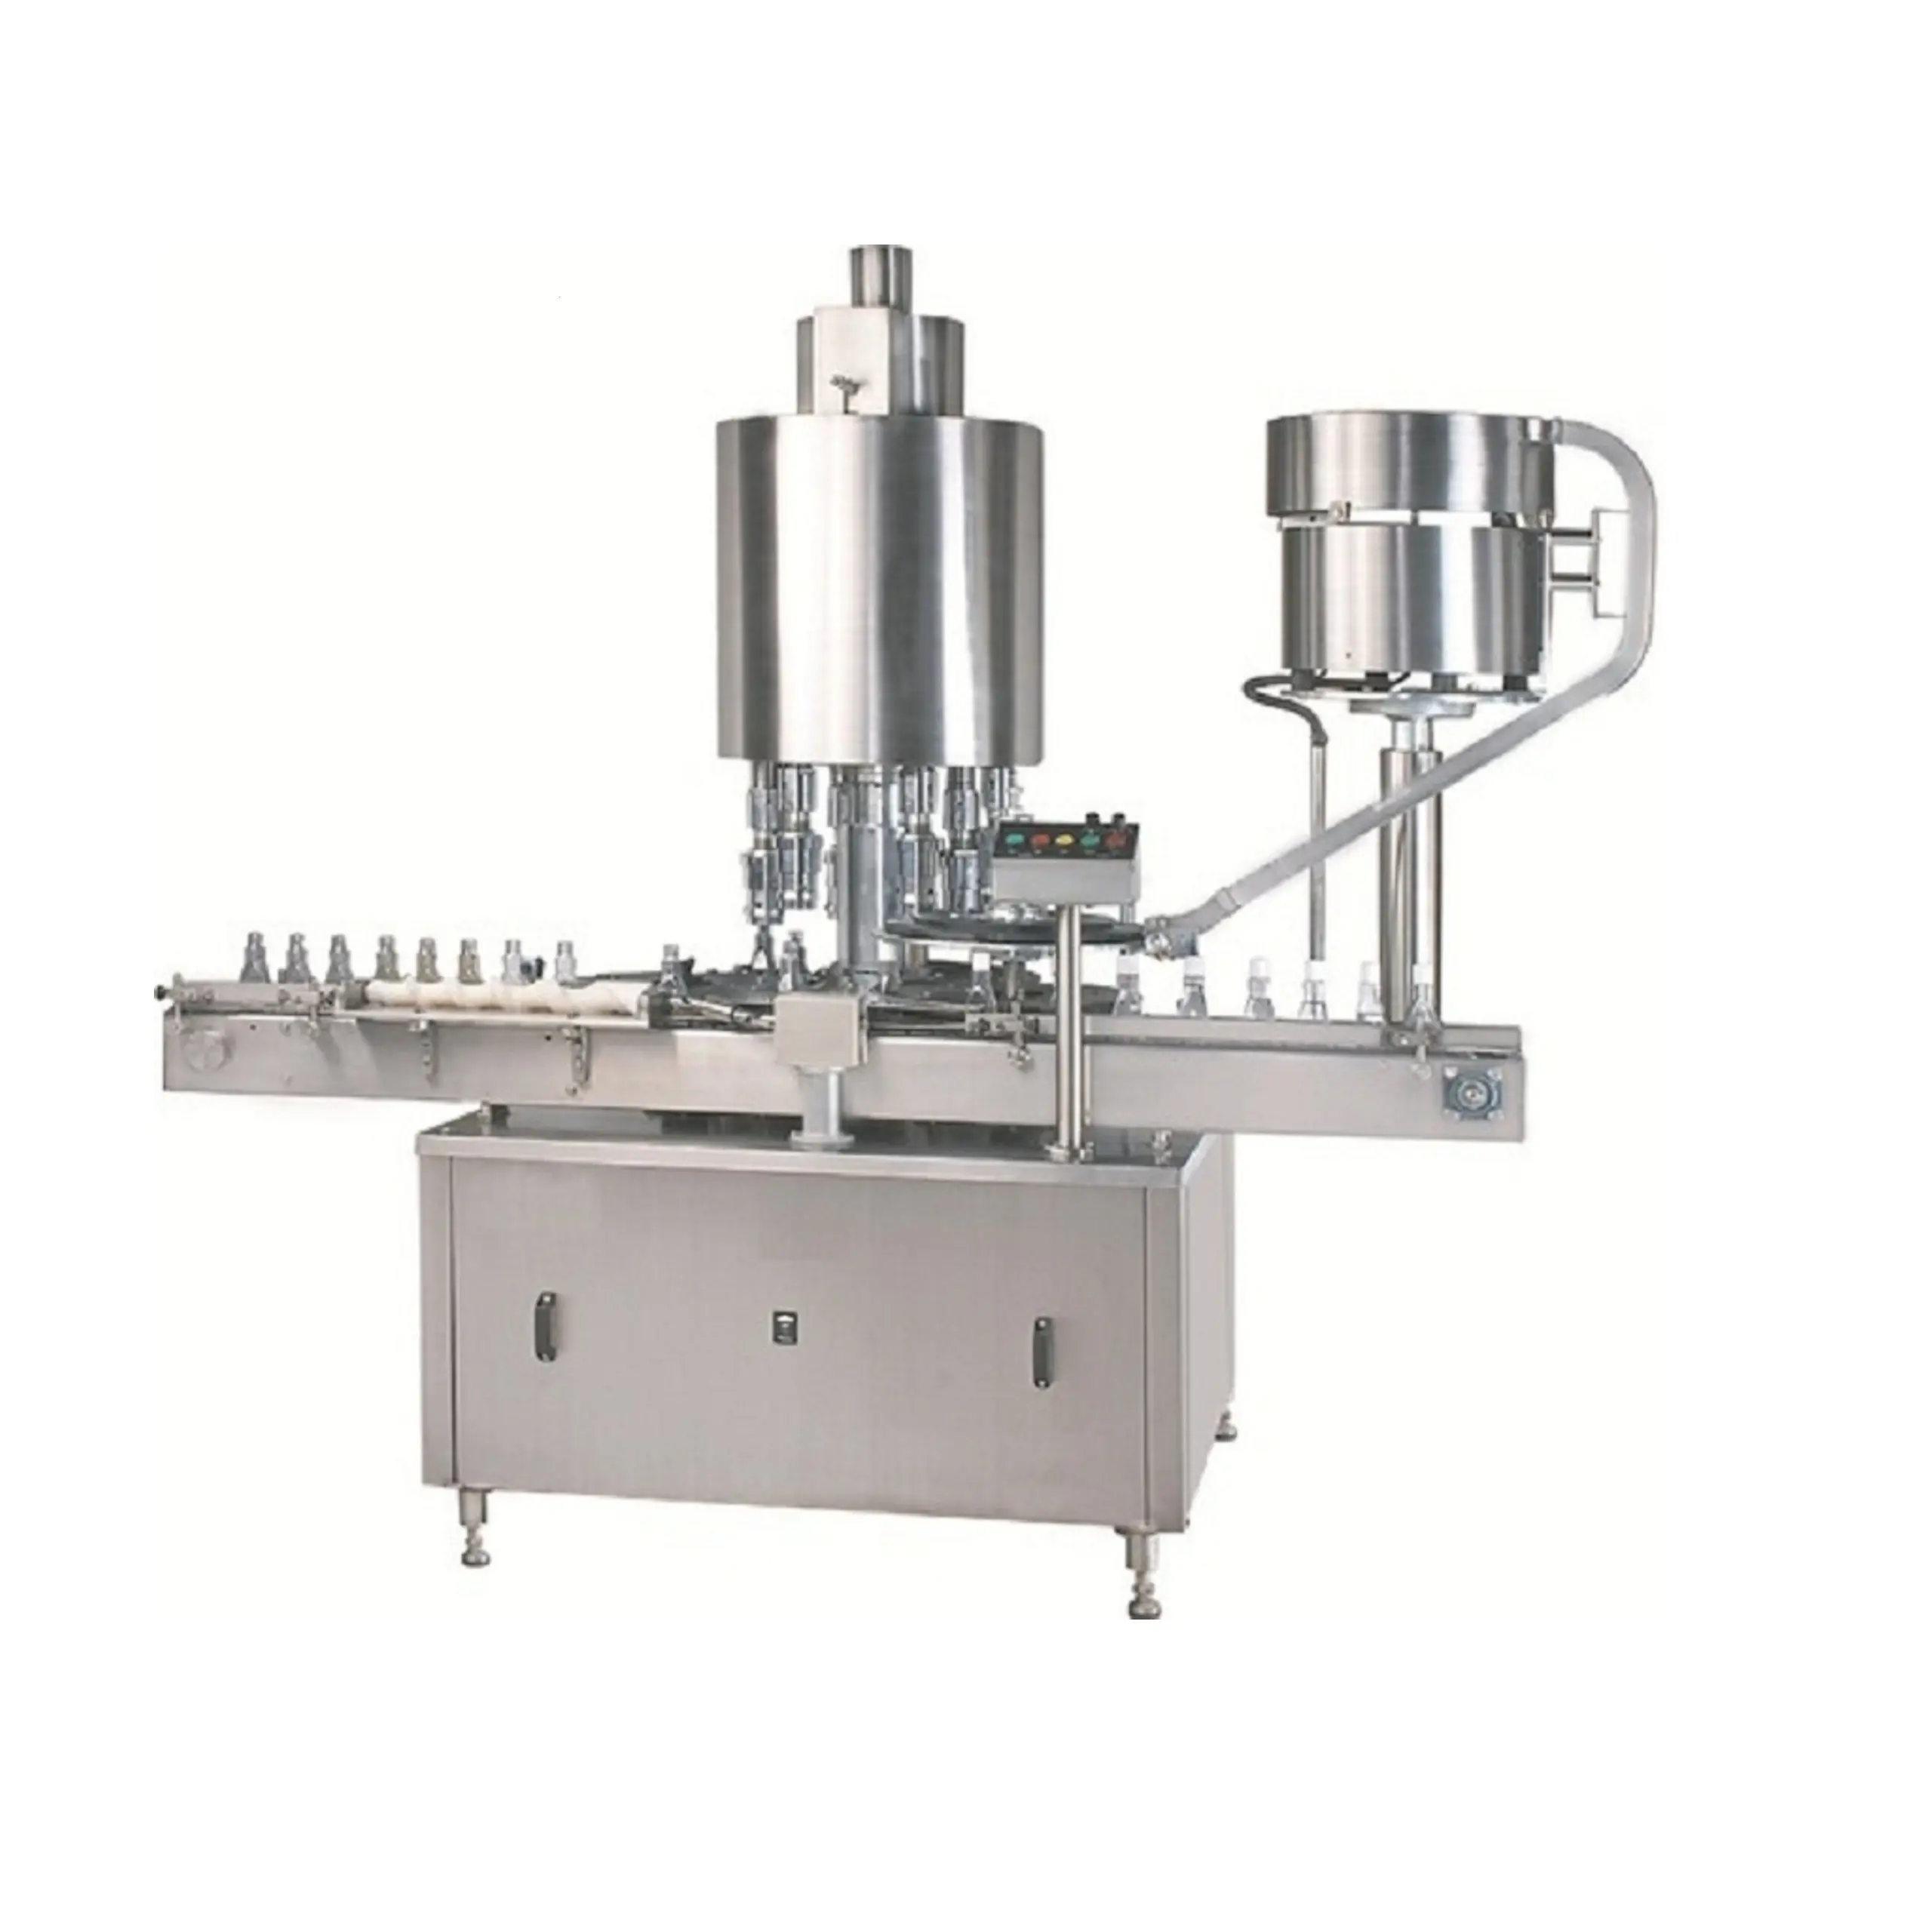 Leak Free Packaging Solution High Grade Bottles Capping Machines for Sale at Reasonable Prices